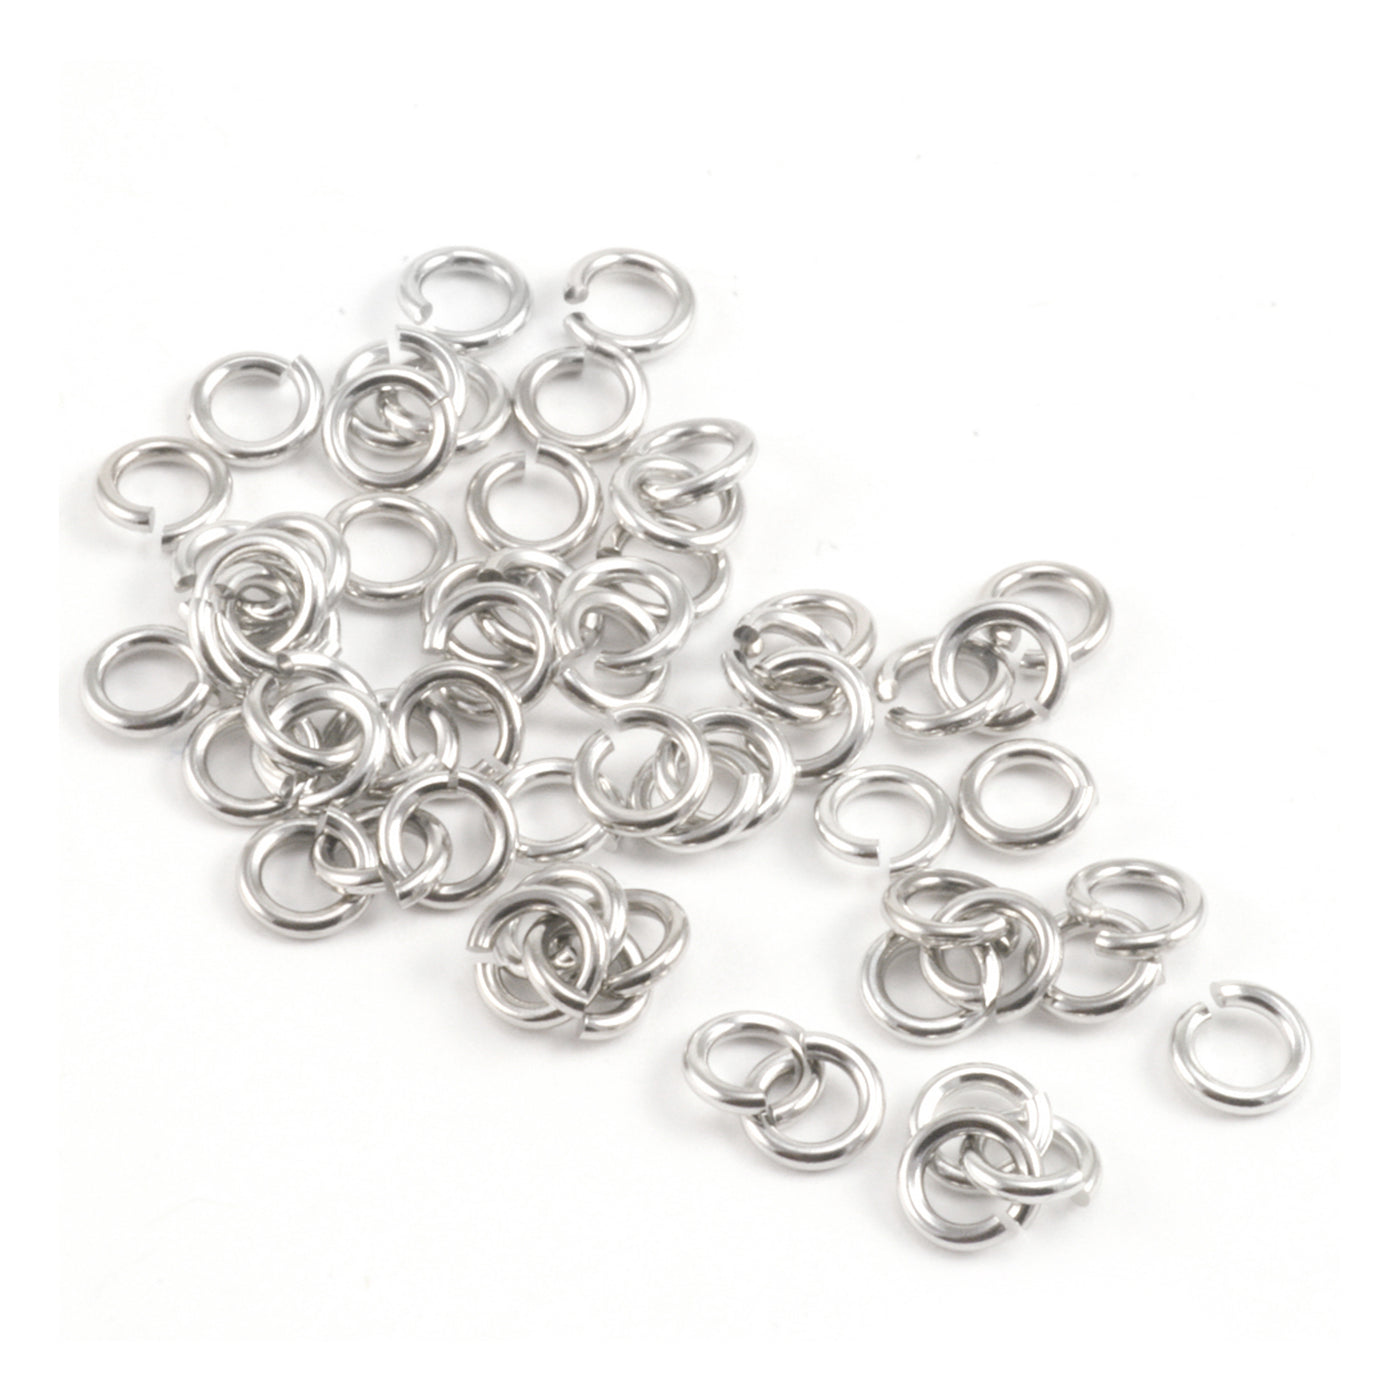 Sterling Silver 3.5mm I.D. 20 Gauge Jump Rings, Pack of 20 – Beaducation